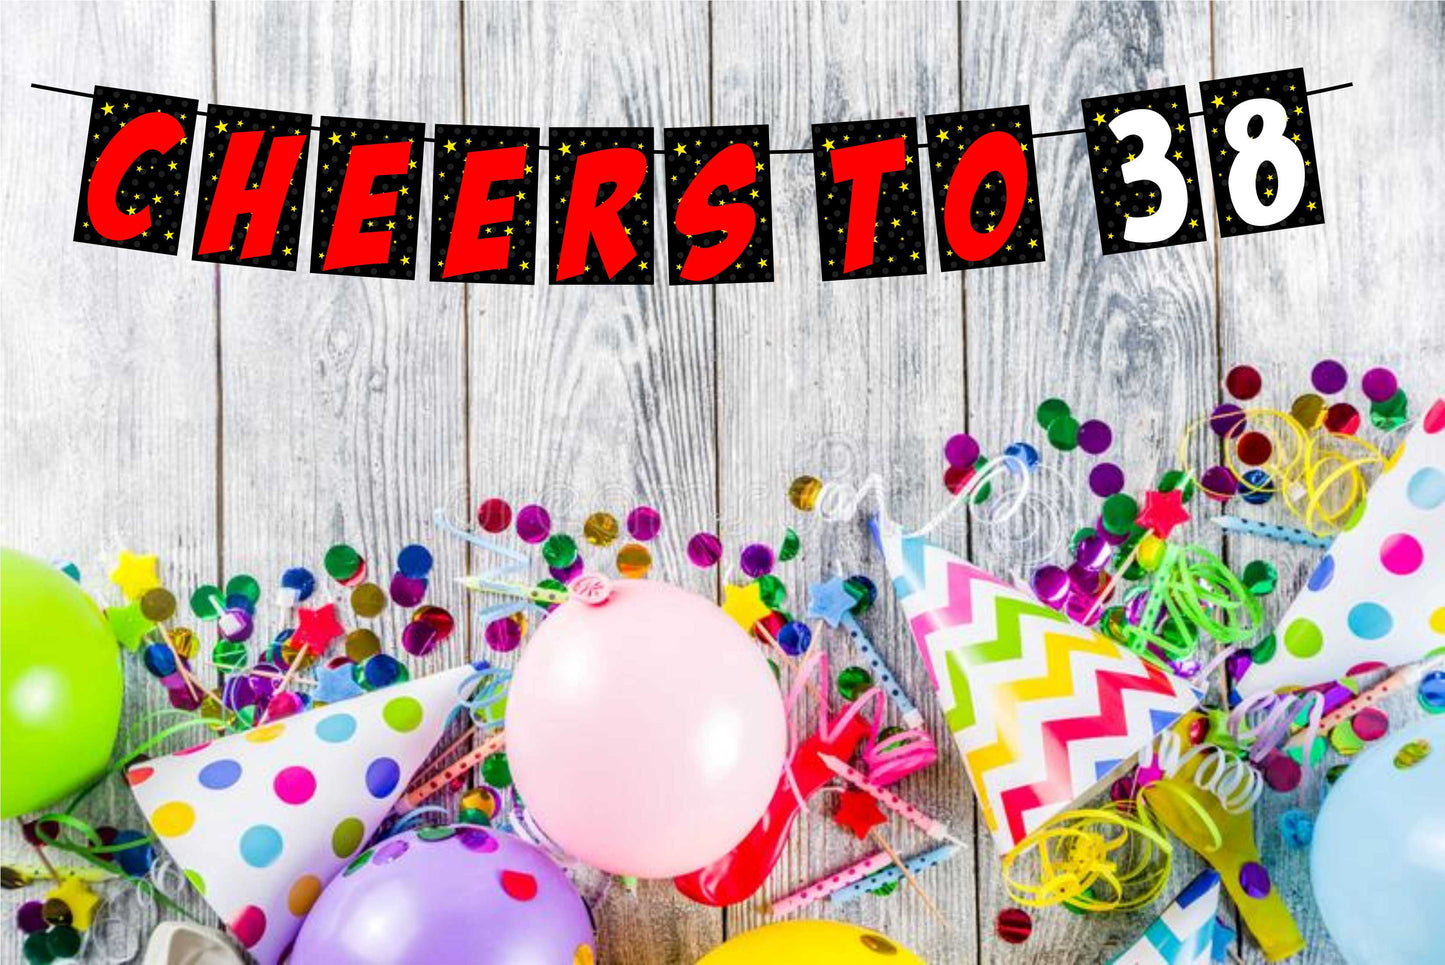 Cheers to 38 Birthday Banner for Photo Shoot Backdrop and Theme Party